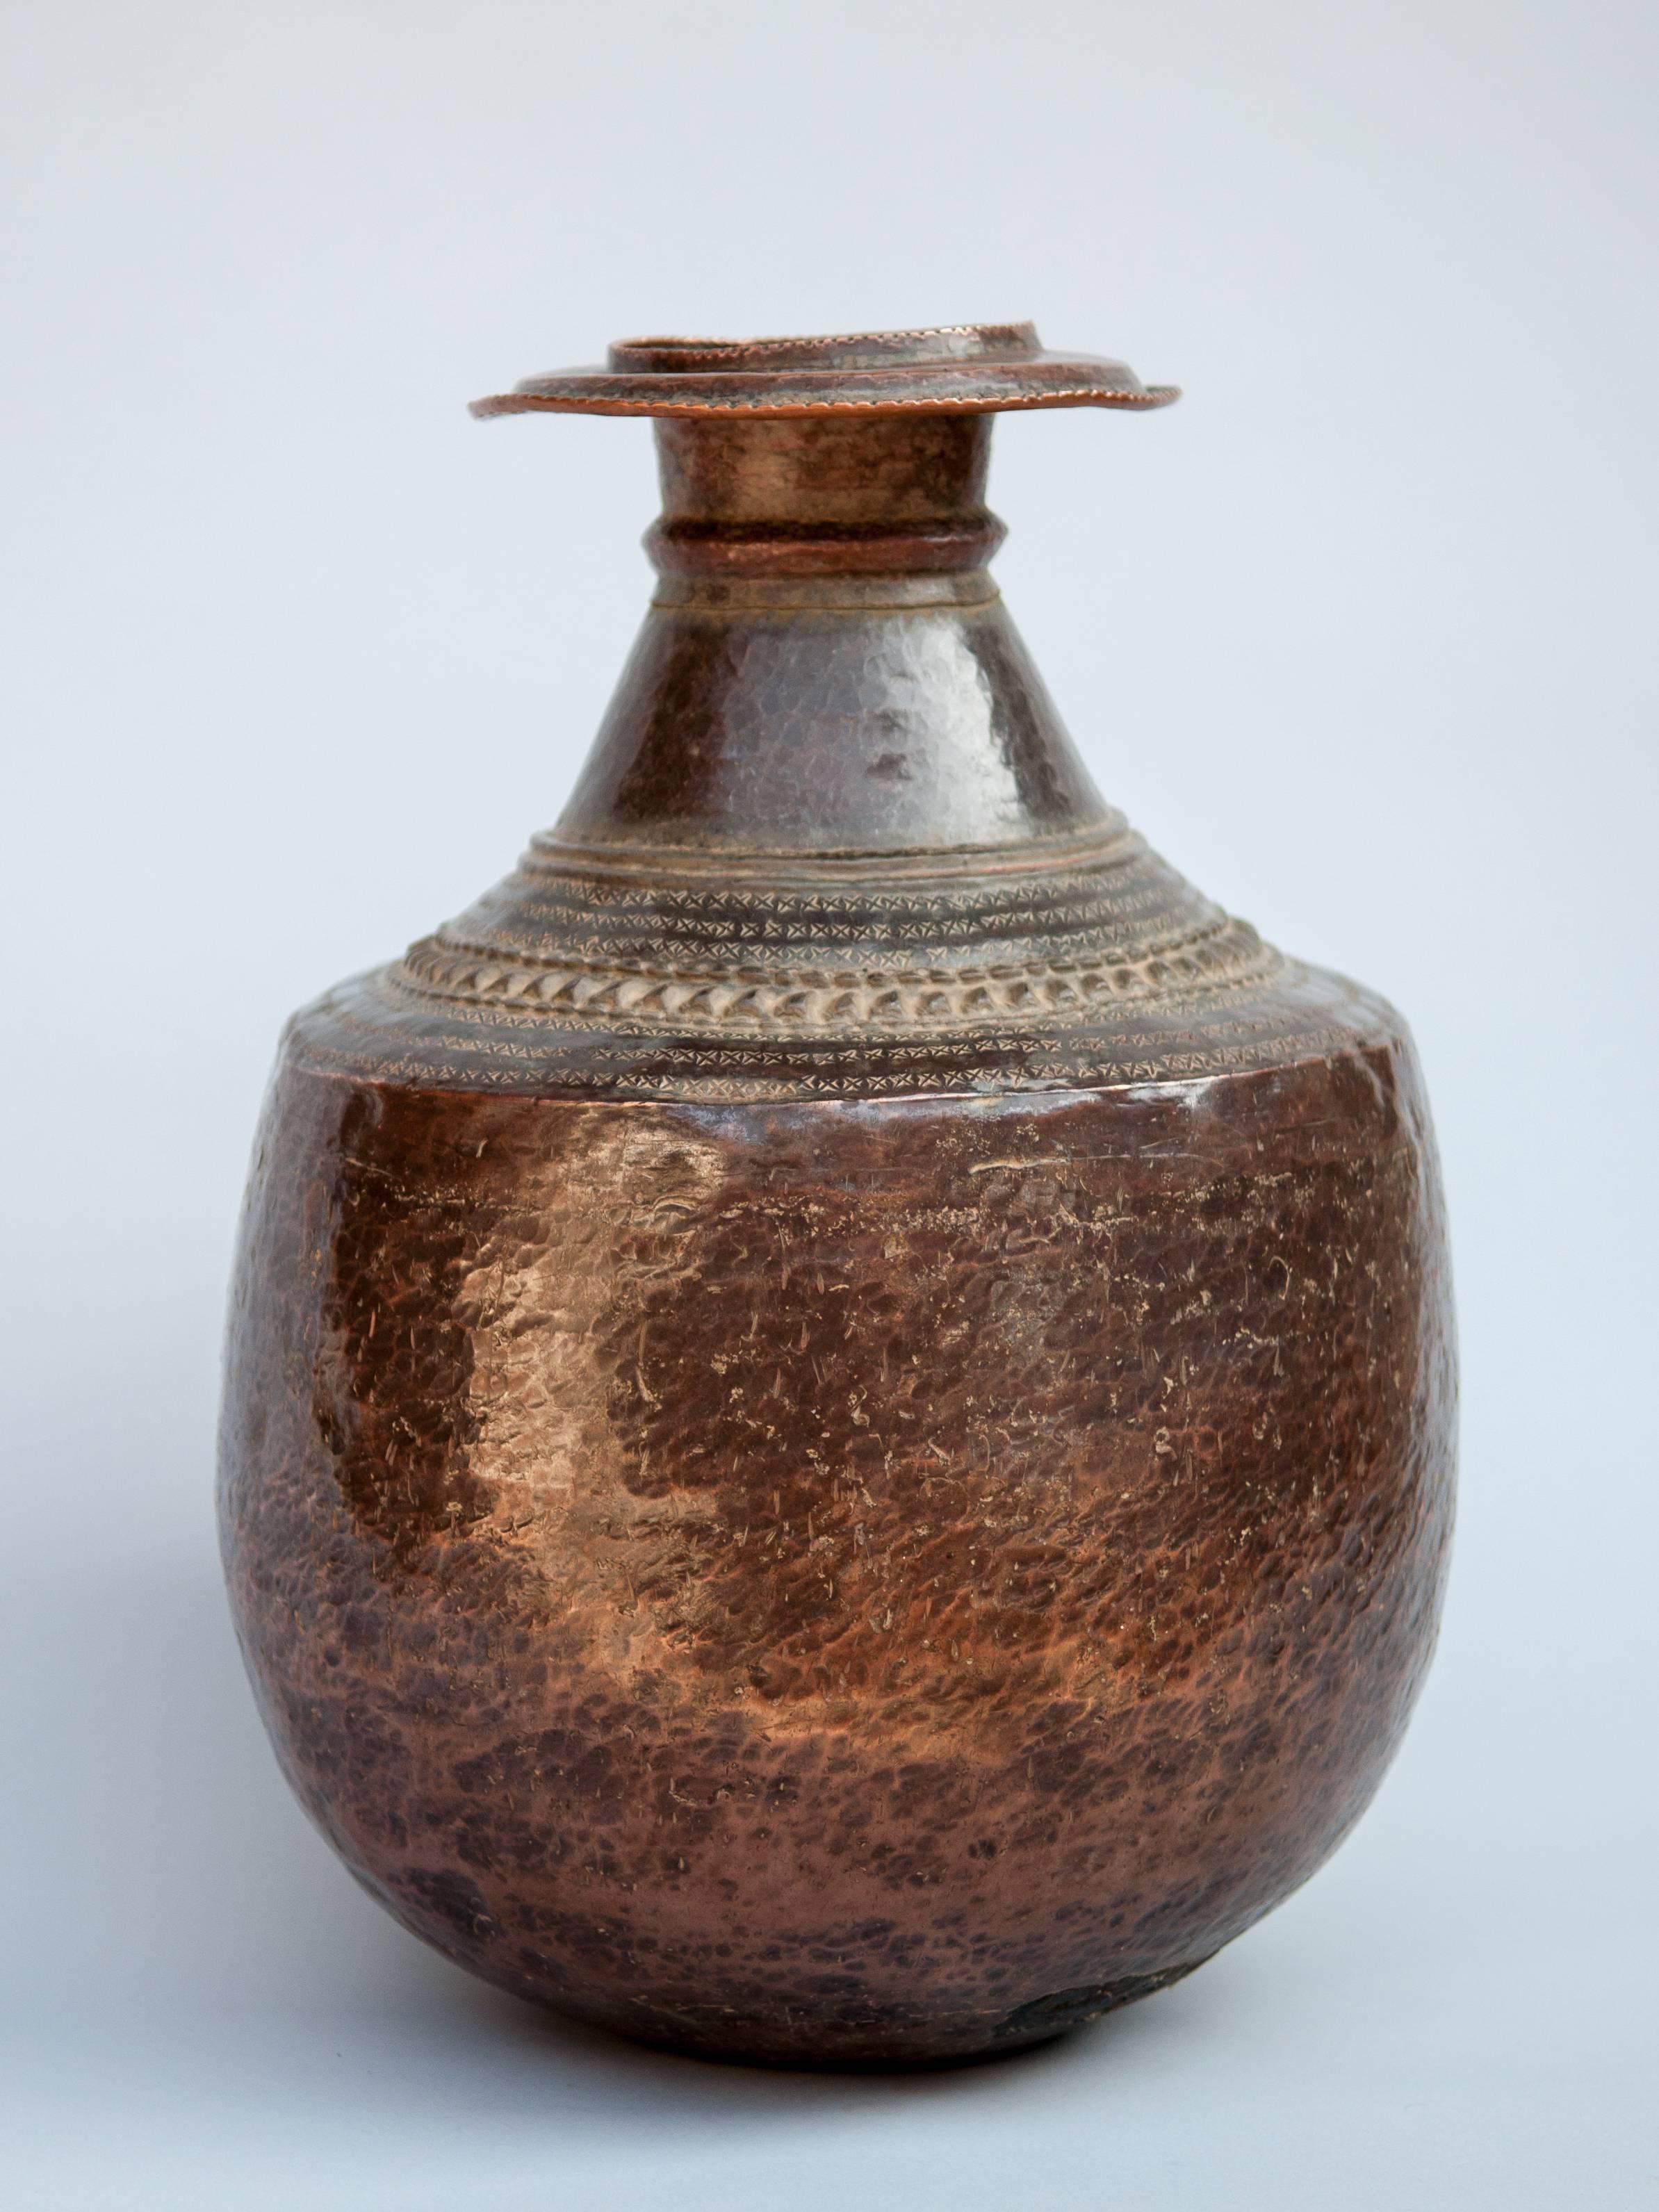 Vintage copper water pot from Nepal, mid-20th century.
A beautifully balanced pot with an aged patina, and hand-hammered decorative repousse work around the shoulder, it was used to collect water and carry back to the home. In Nepal these pots are